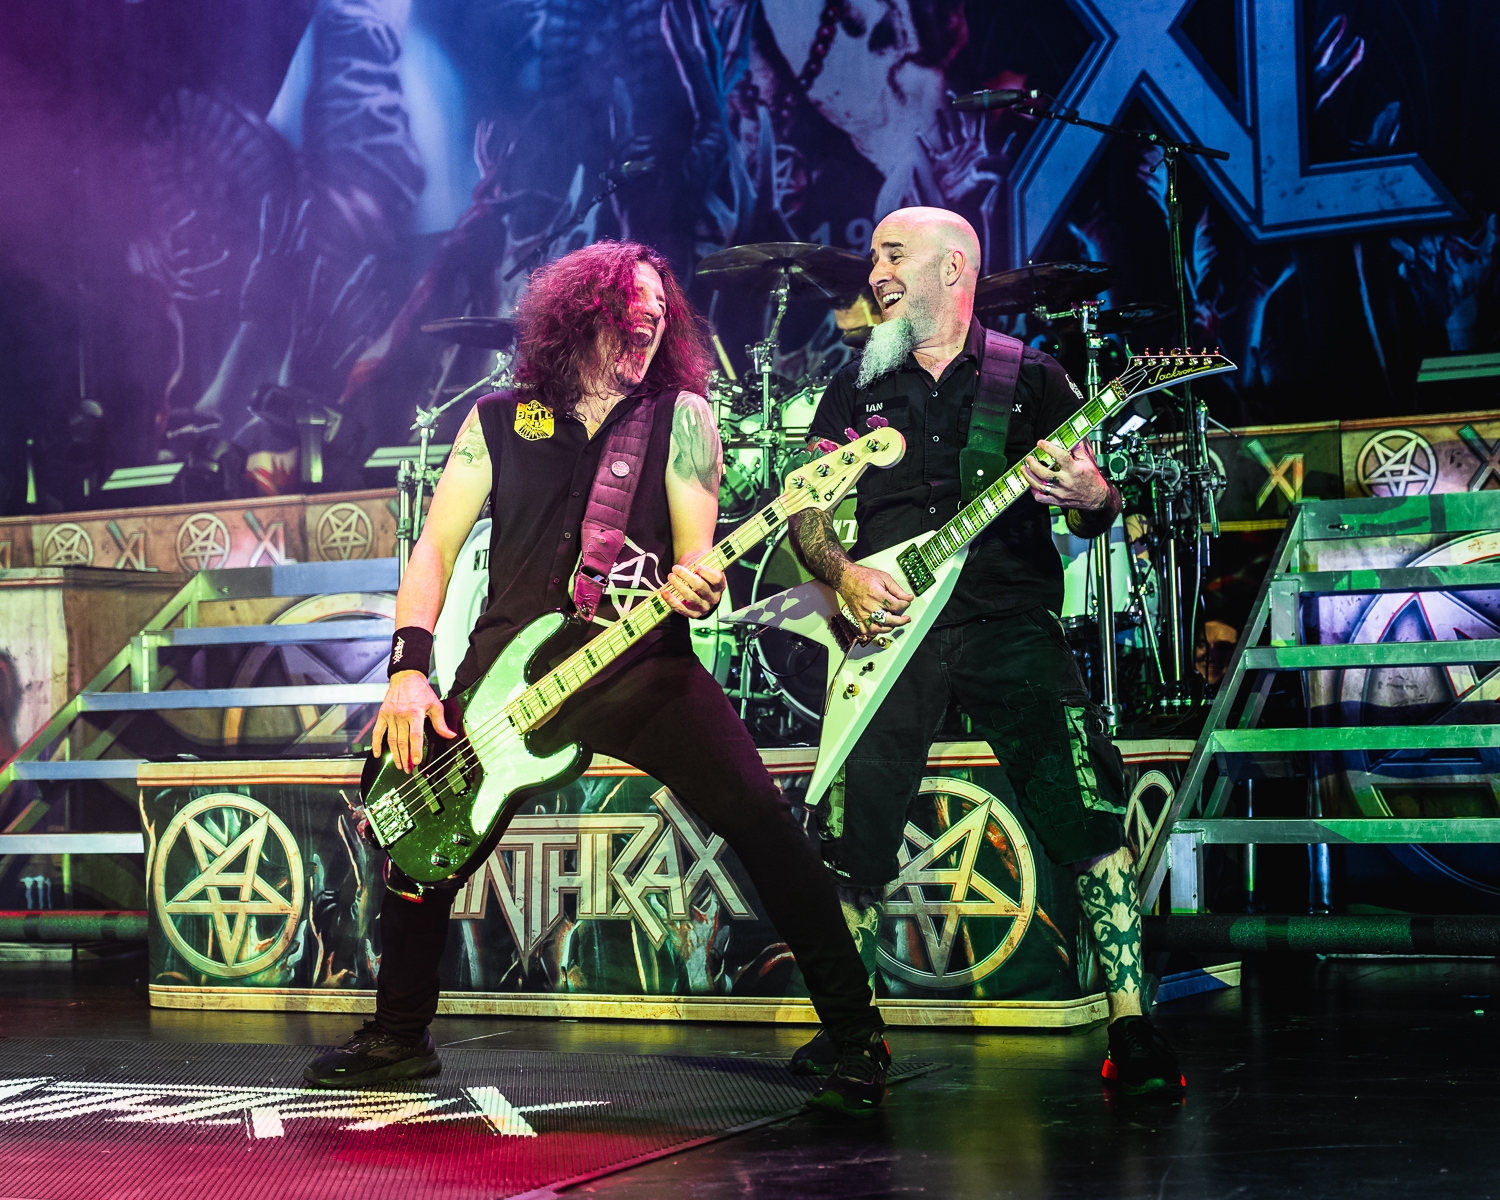 Anthrax Brings The Noise to Seattle SMI (Seattle Music Insider)